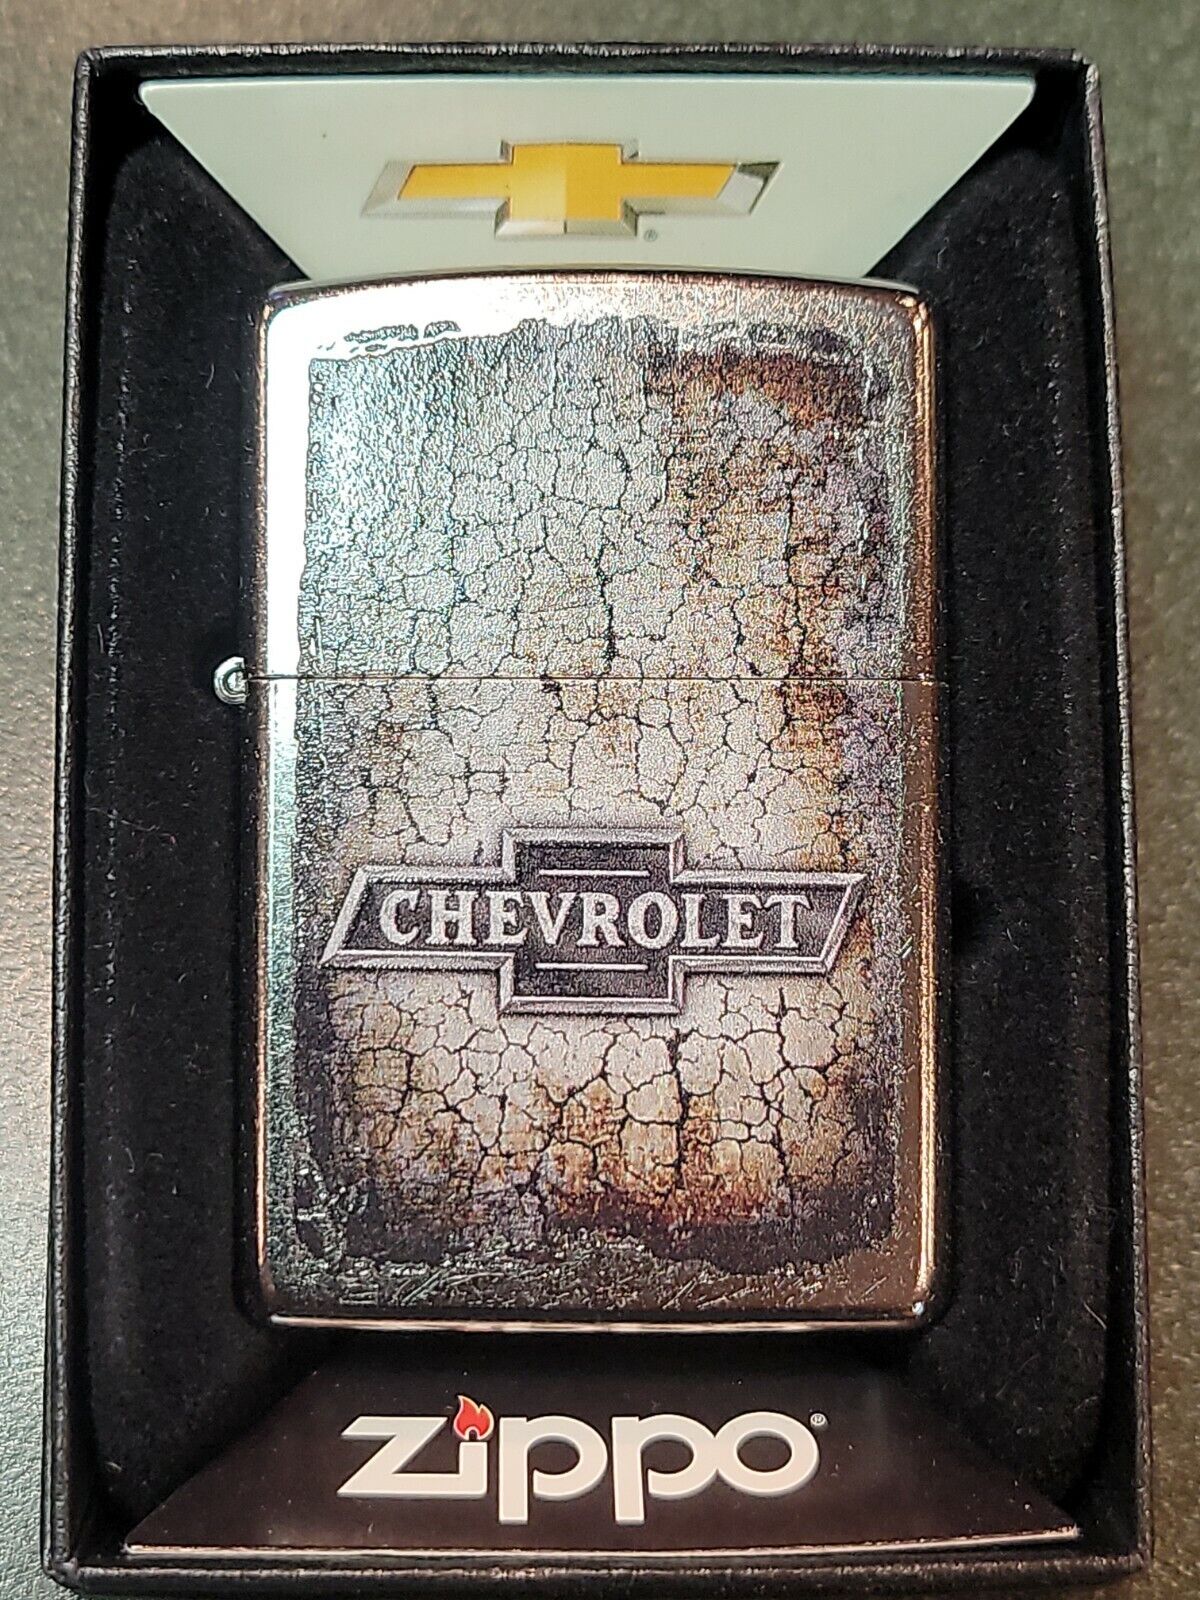 Zippo Lighter - Chevrolet Chevy - GM - Bowtie - SS PARCHED DESIGN - #107